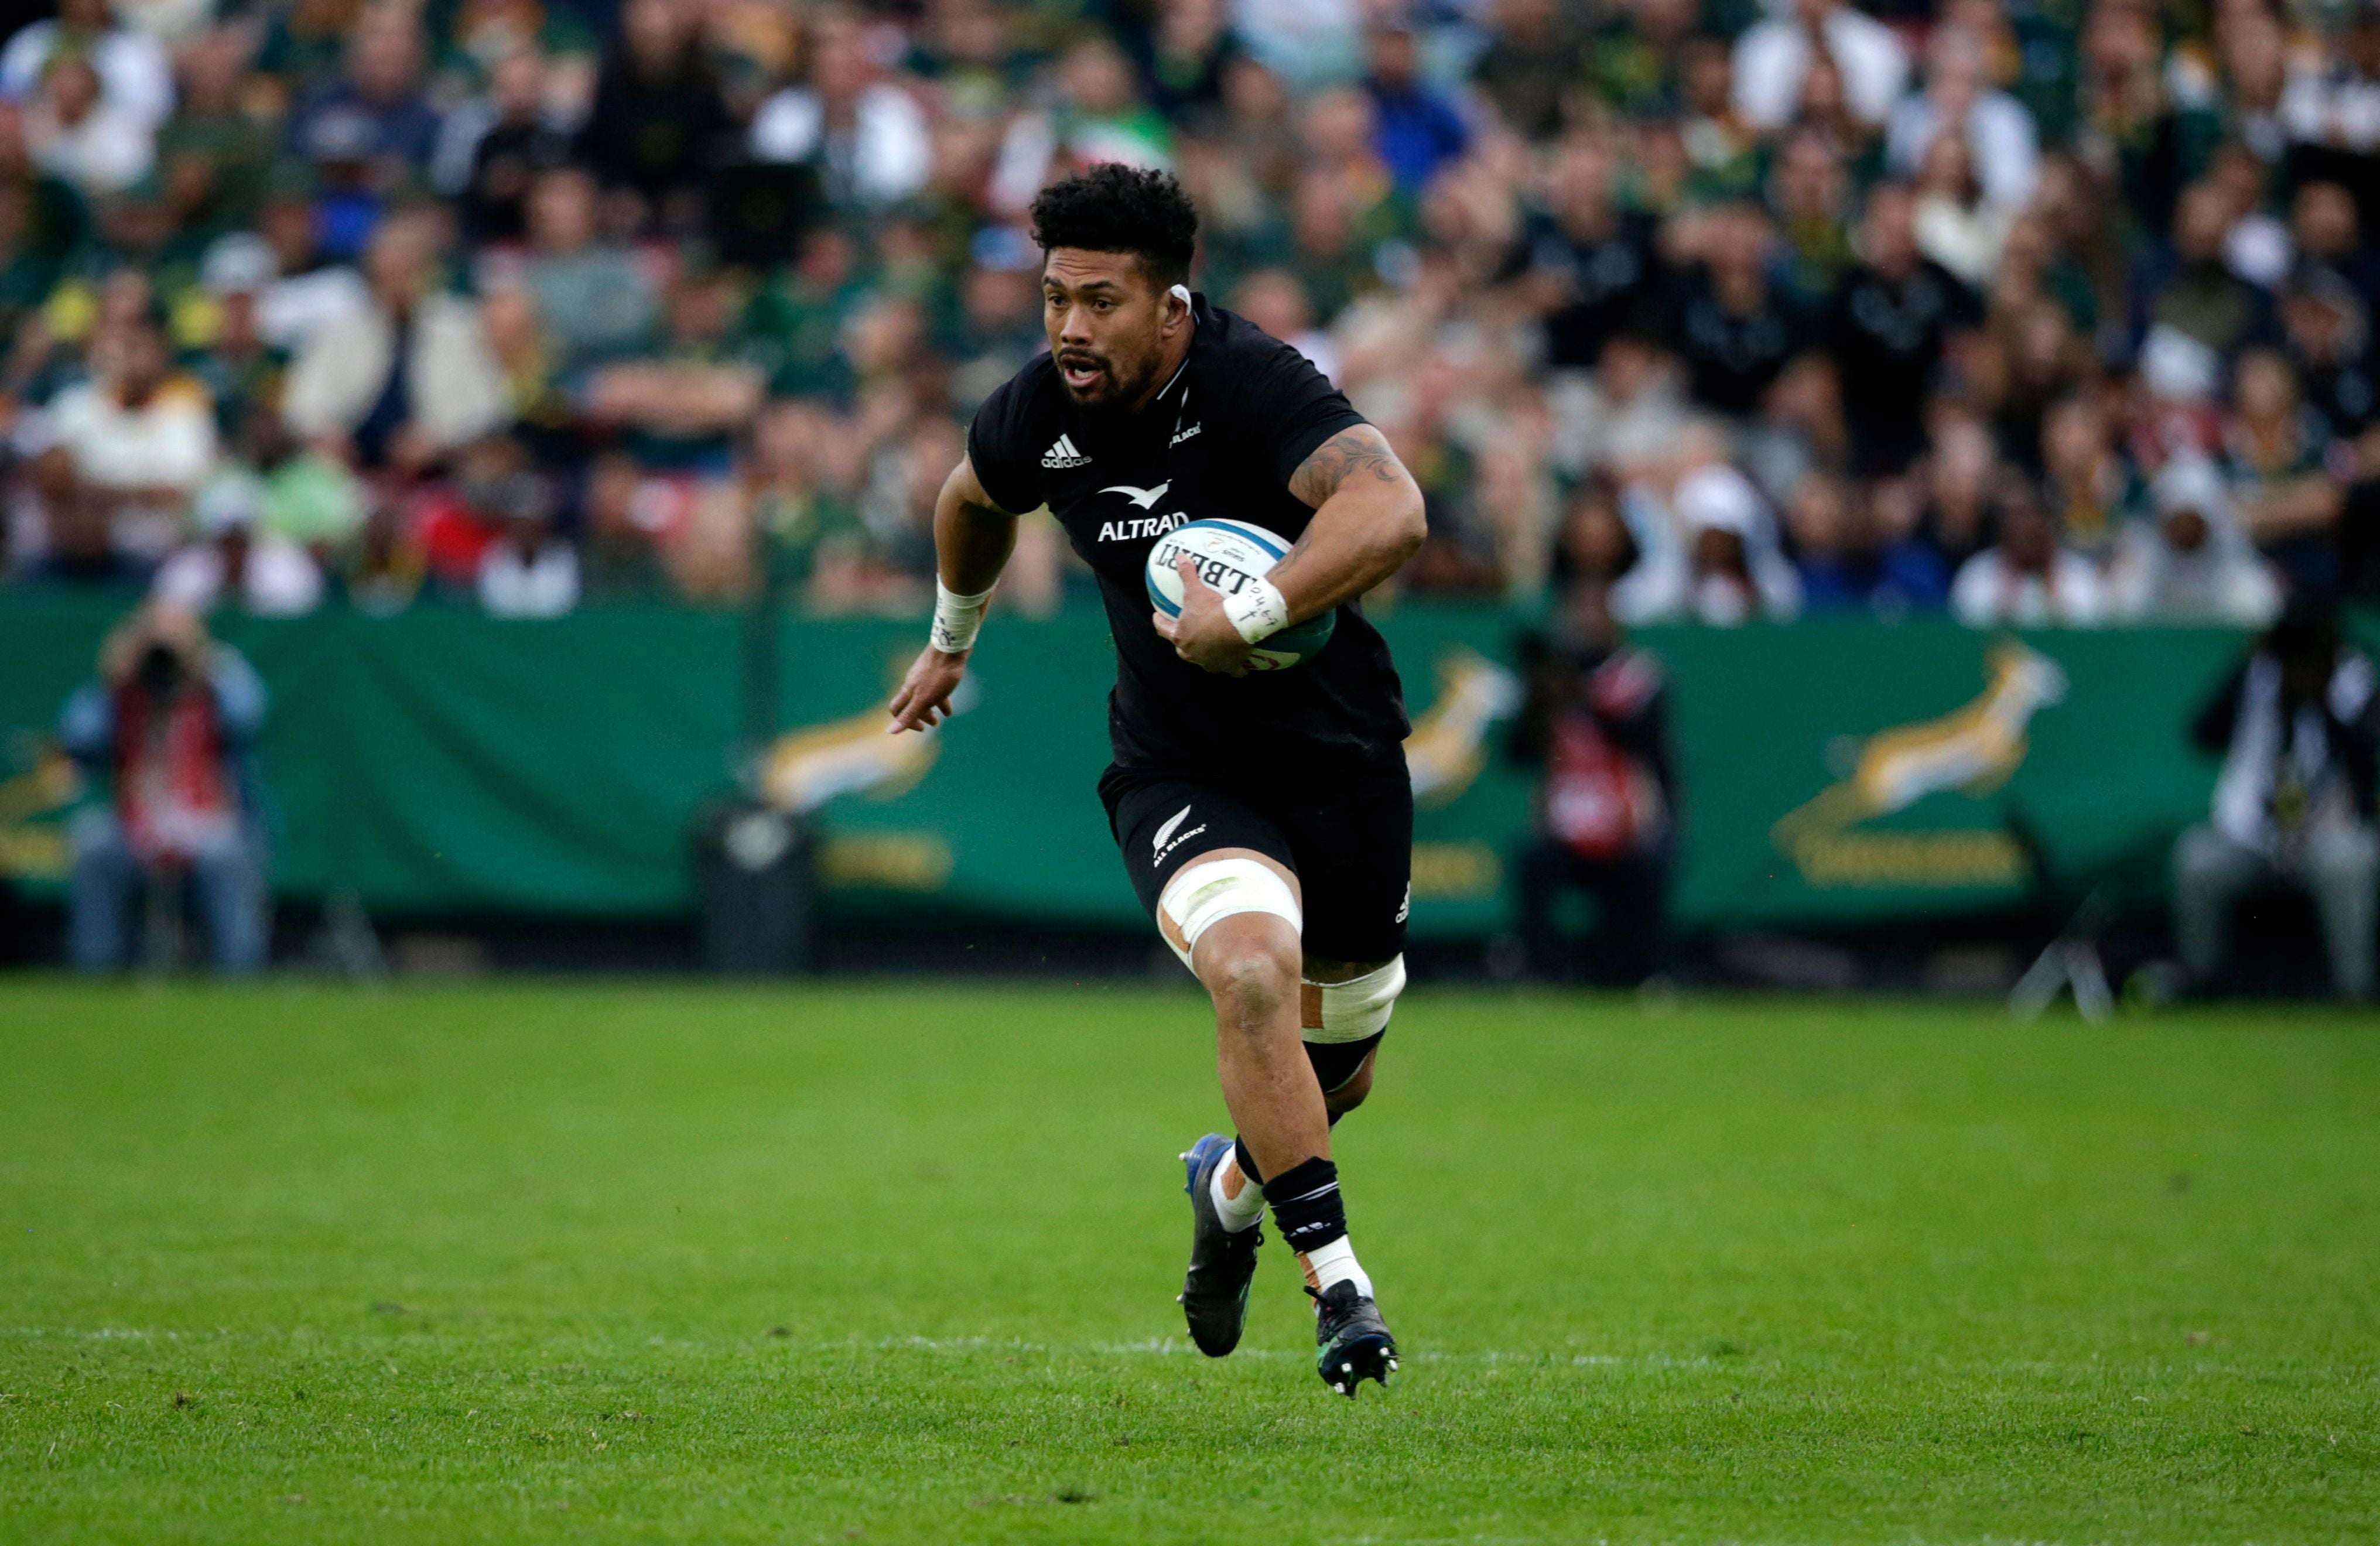 New Zealand No 8 Ardie Savea’s return will be a huge boost for the All Blacks